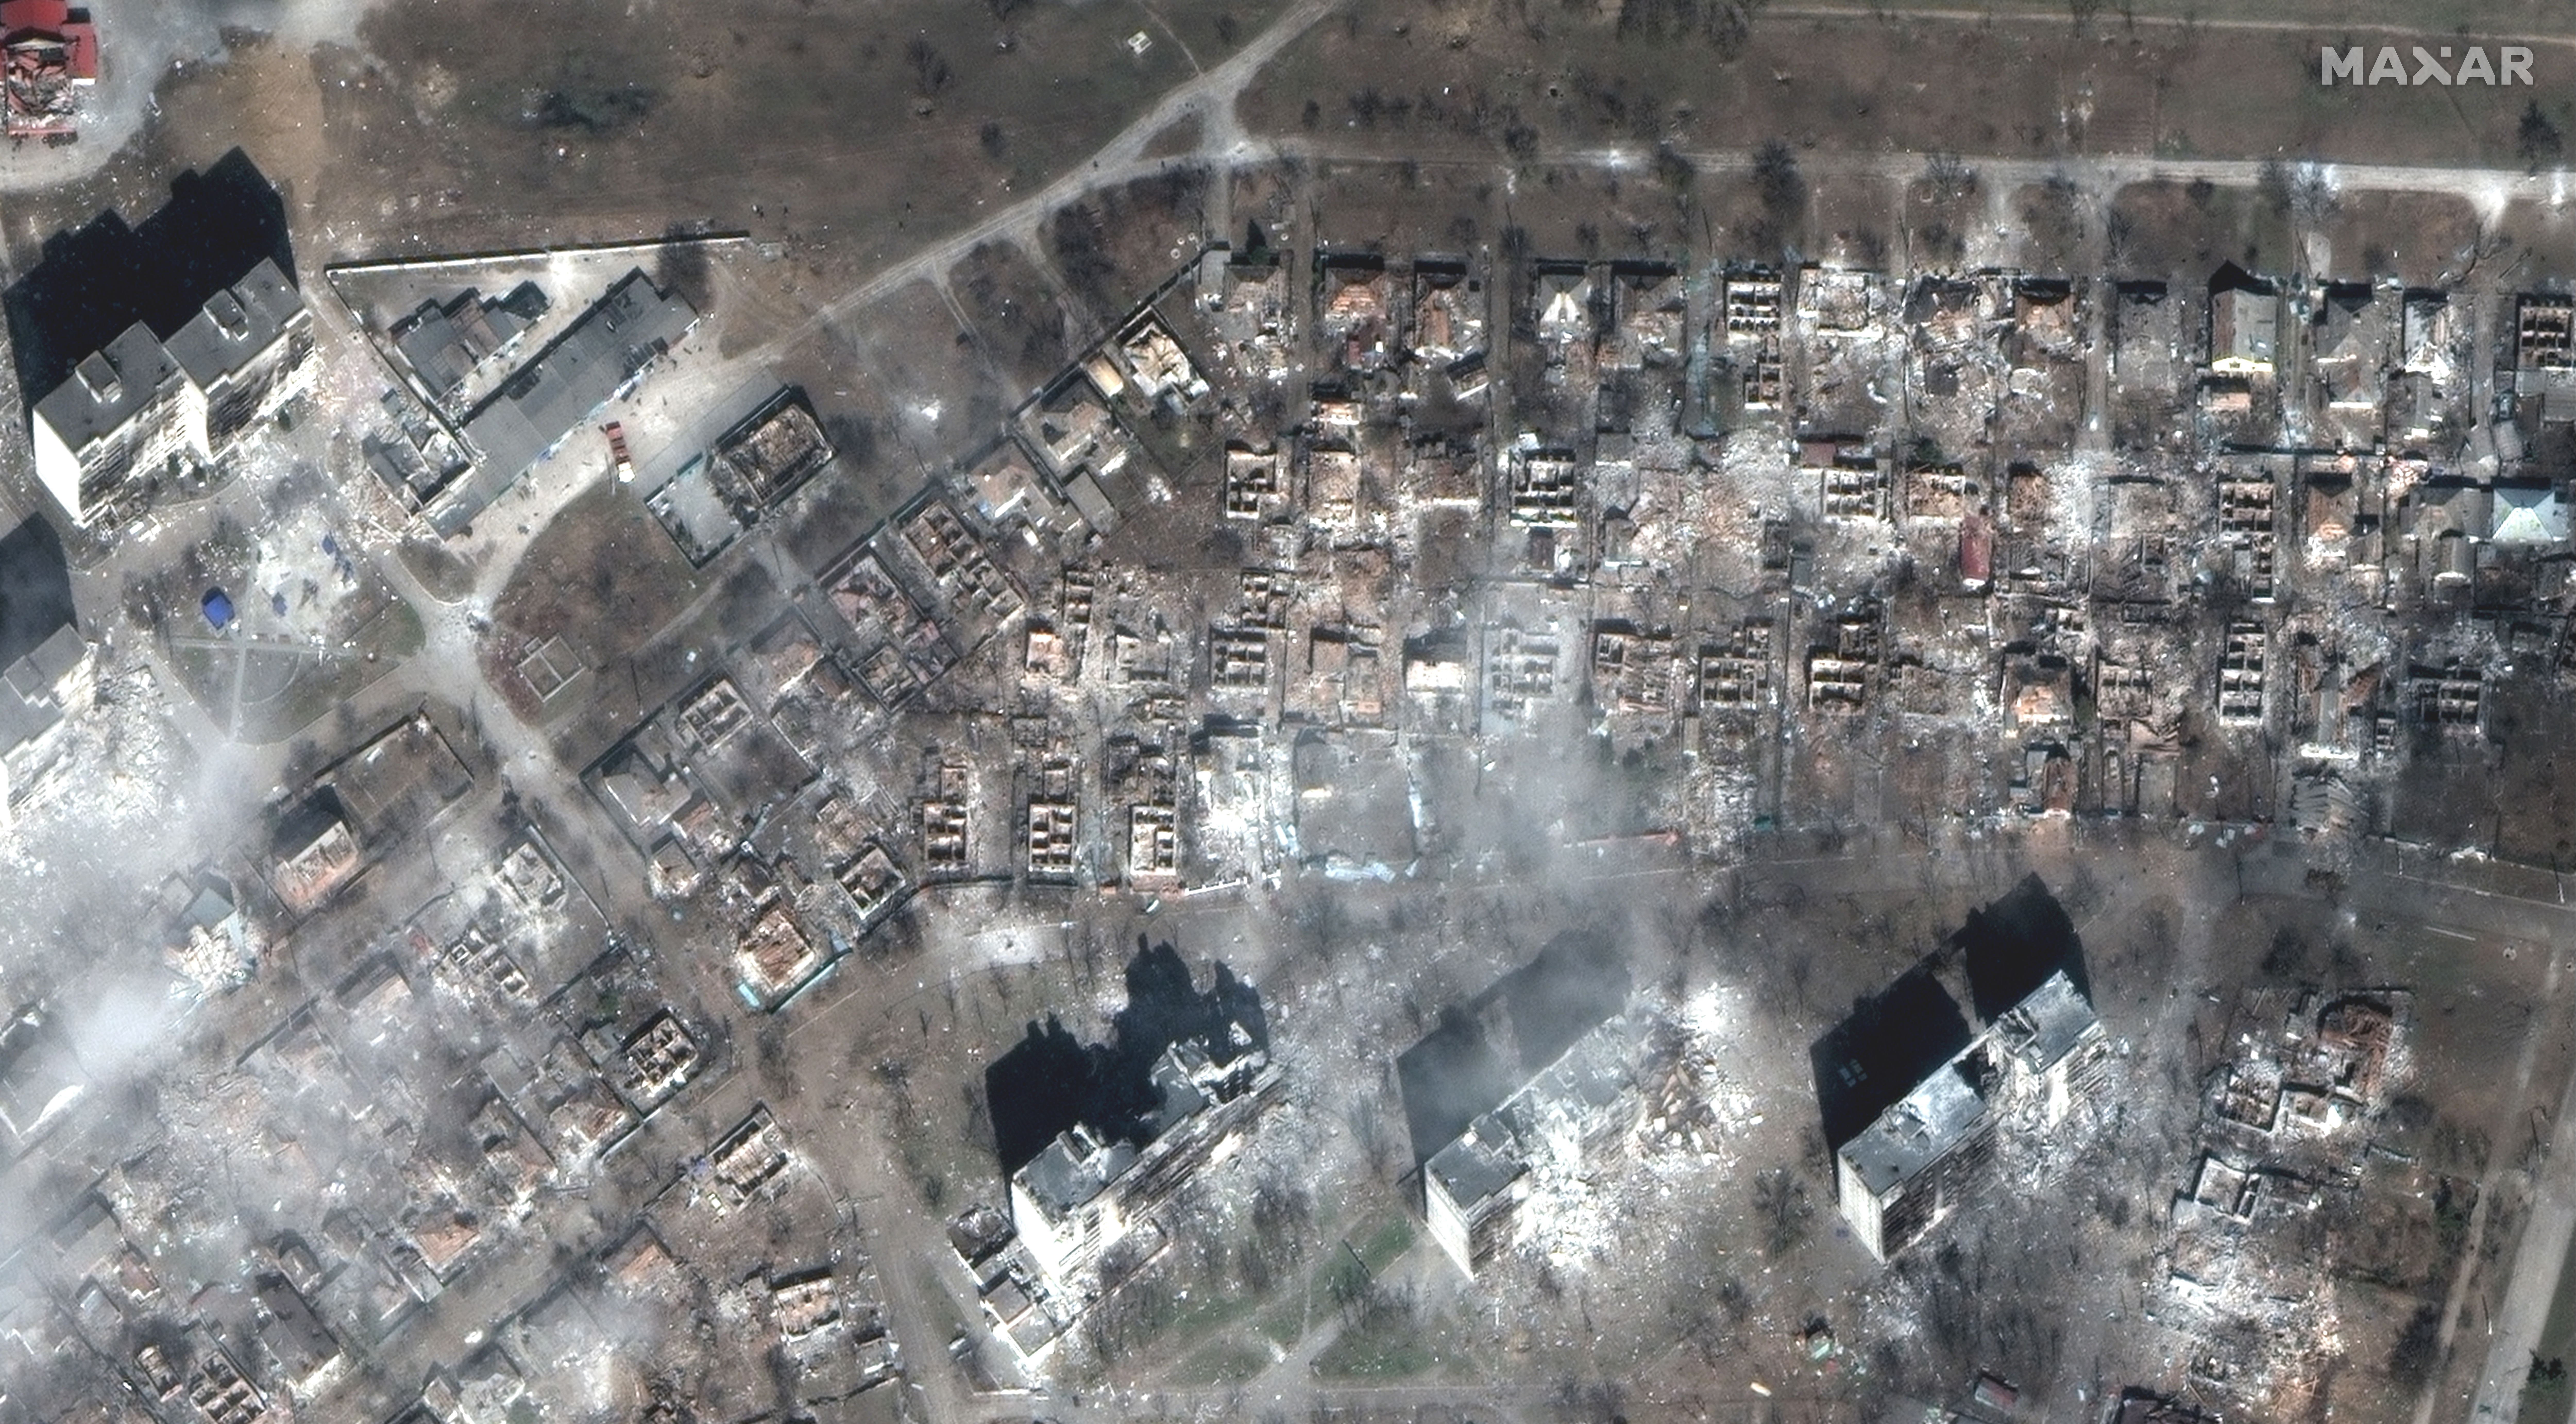 On March 29, apartment buildings and houses in Mariupol were destroyed by shelling.